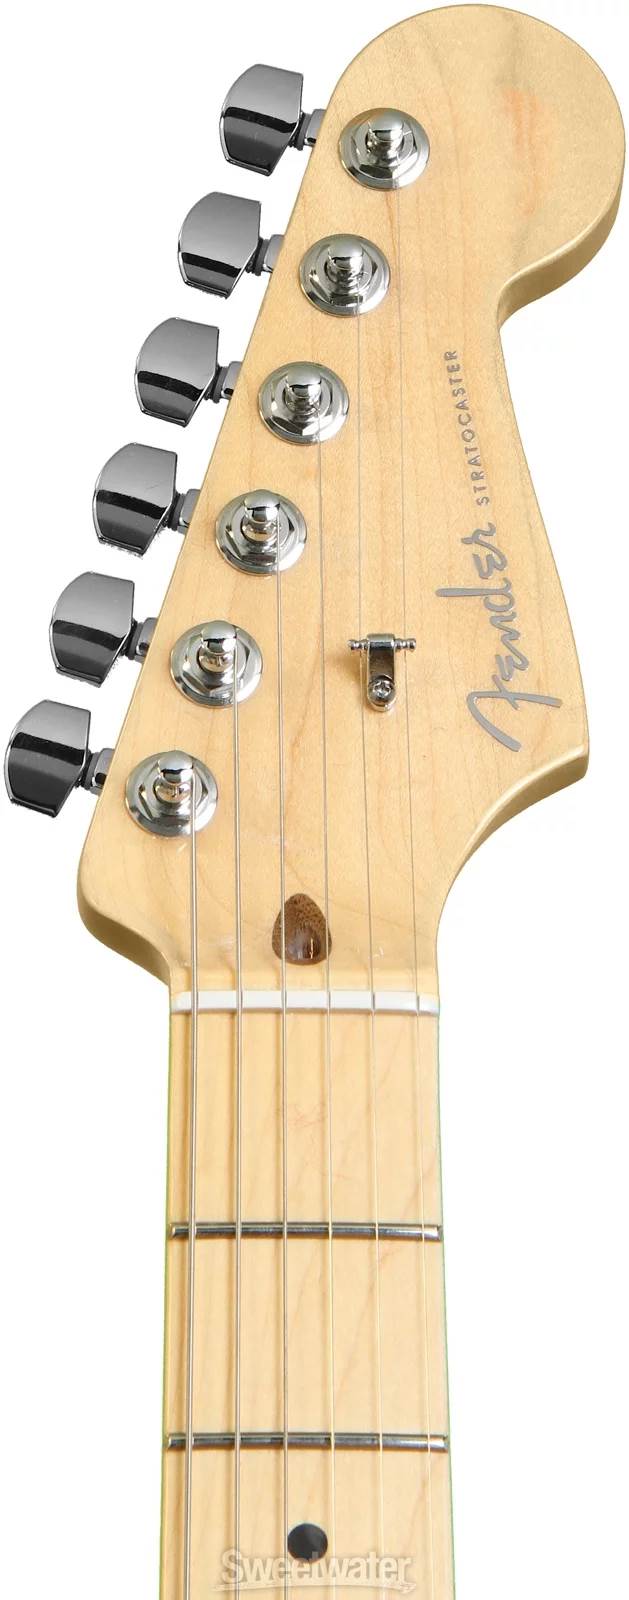 Dealer Event American Deluxe stratocaster Headstock front